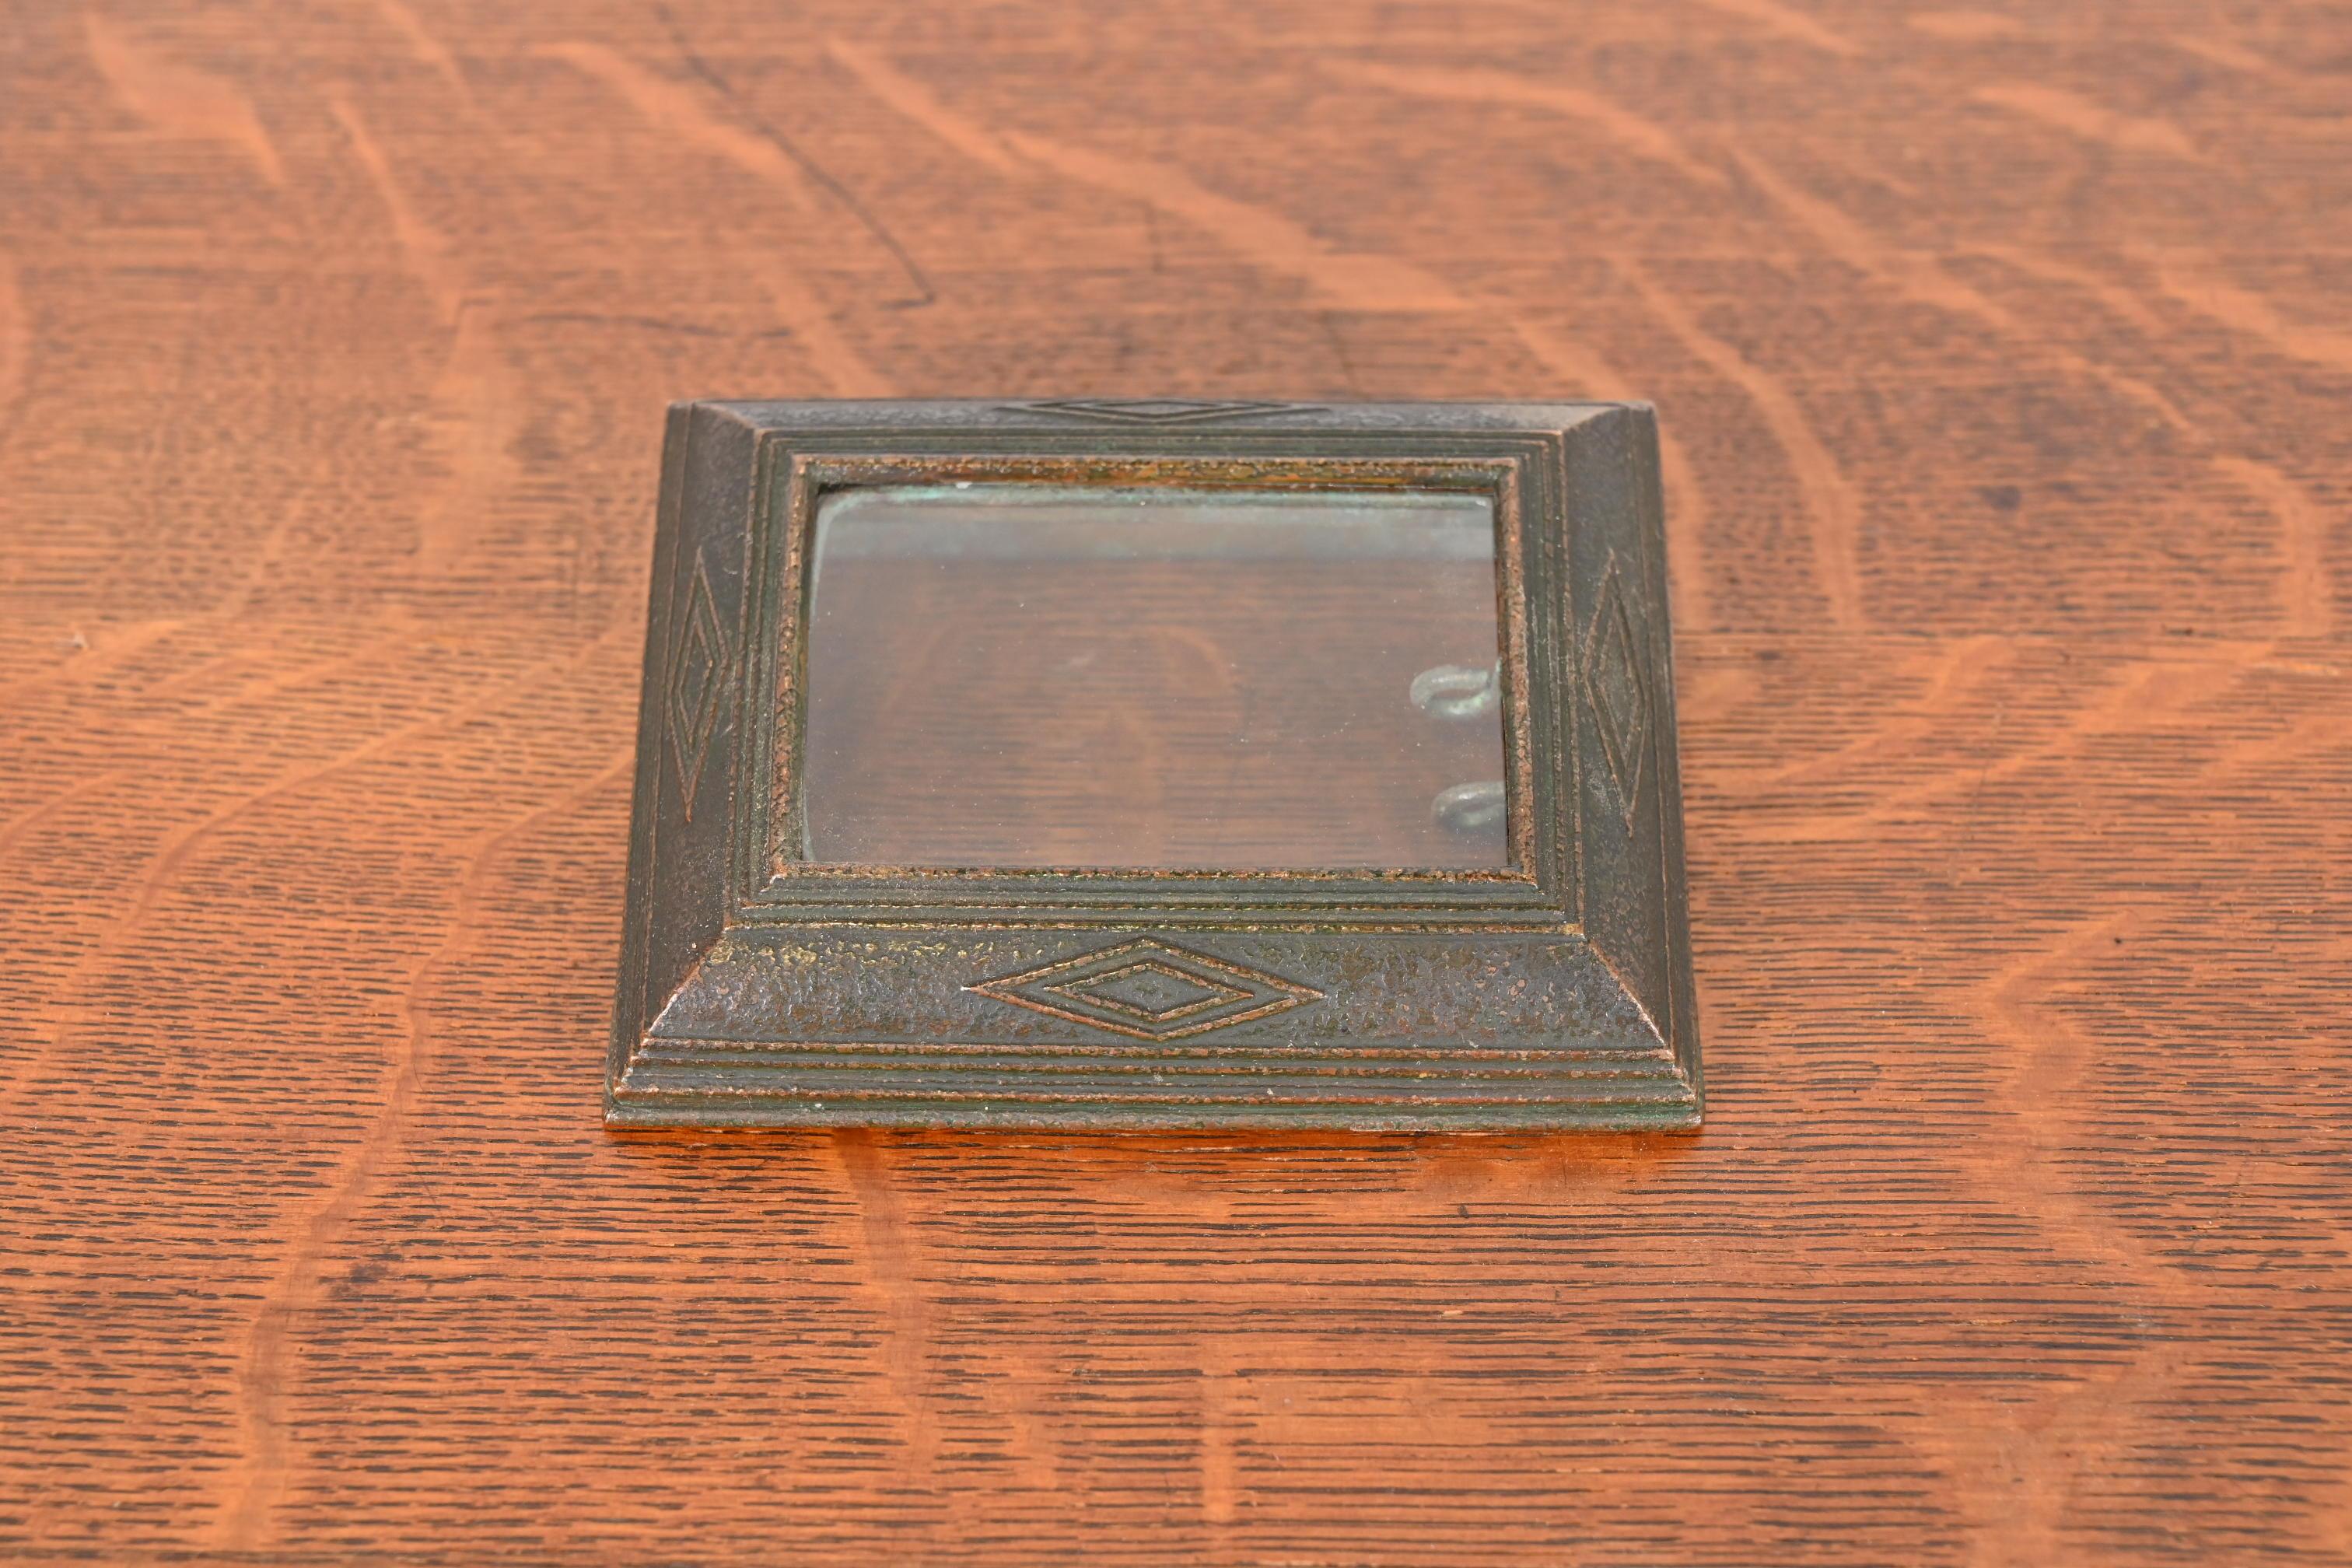 A gorgeous antique bronze Graduate pattern calendar holder or picture frame with verdigris green patina

By Tiffany Studios, #1792 (signed to the underside)

New York, USA, Early 20th Century

Measures: 4.5